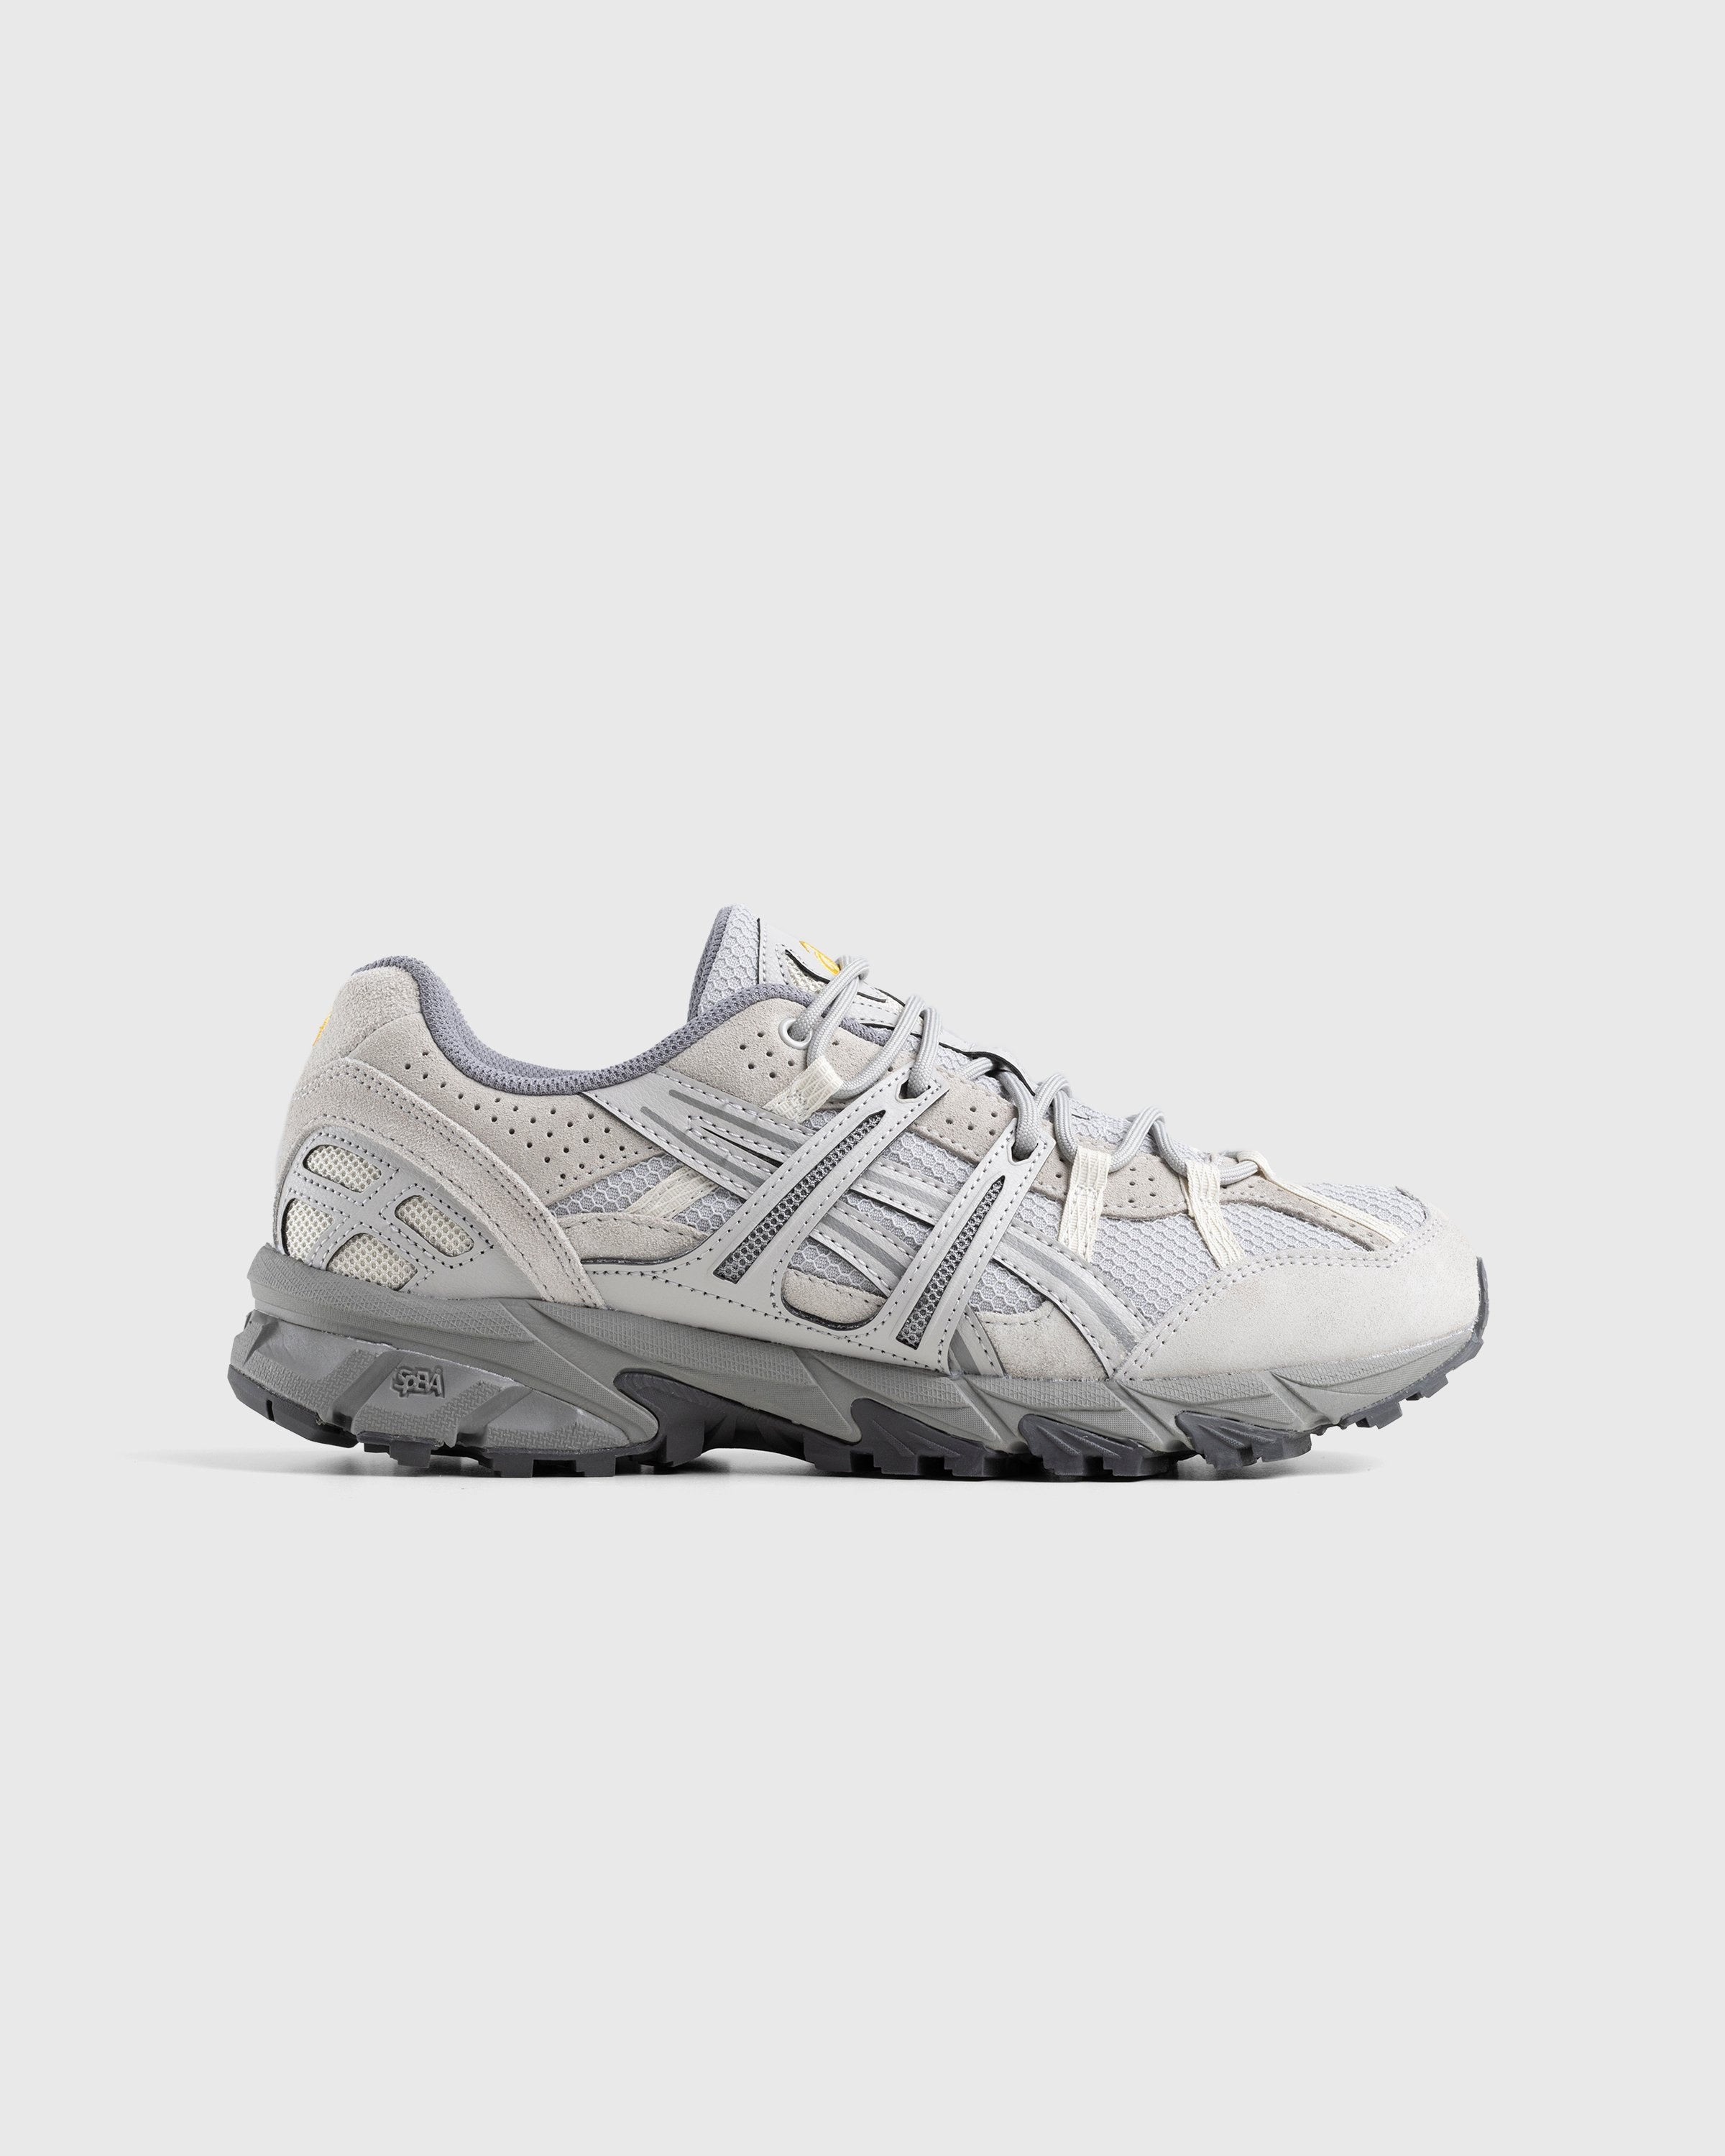 asics – Gel-Sonoma 15-50 Oyster Grey/Clay Grey - Sneakers - Grey - Image 1